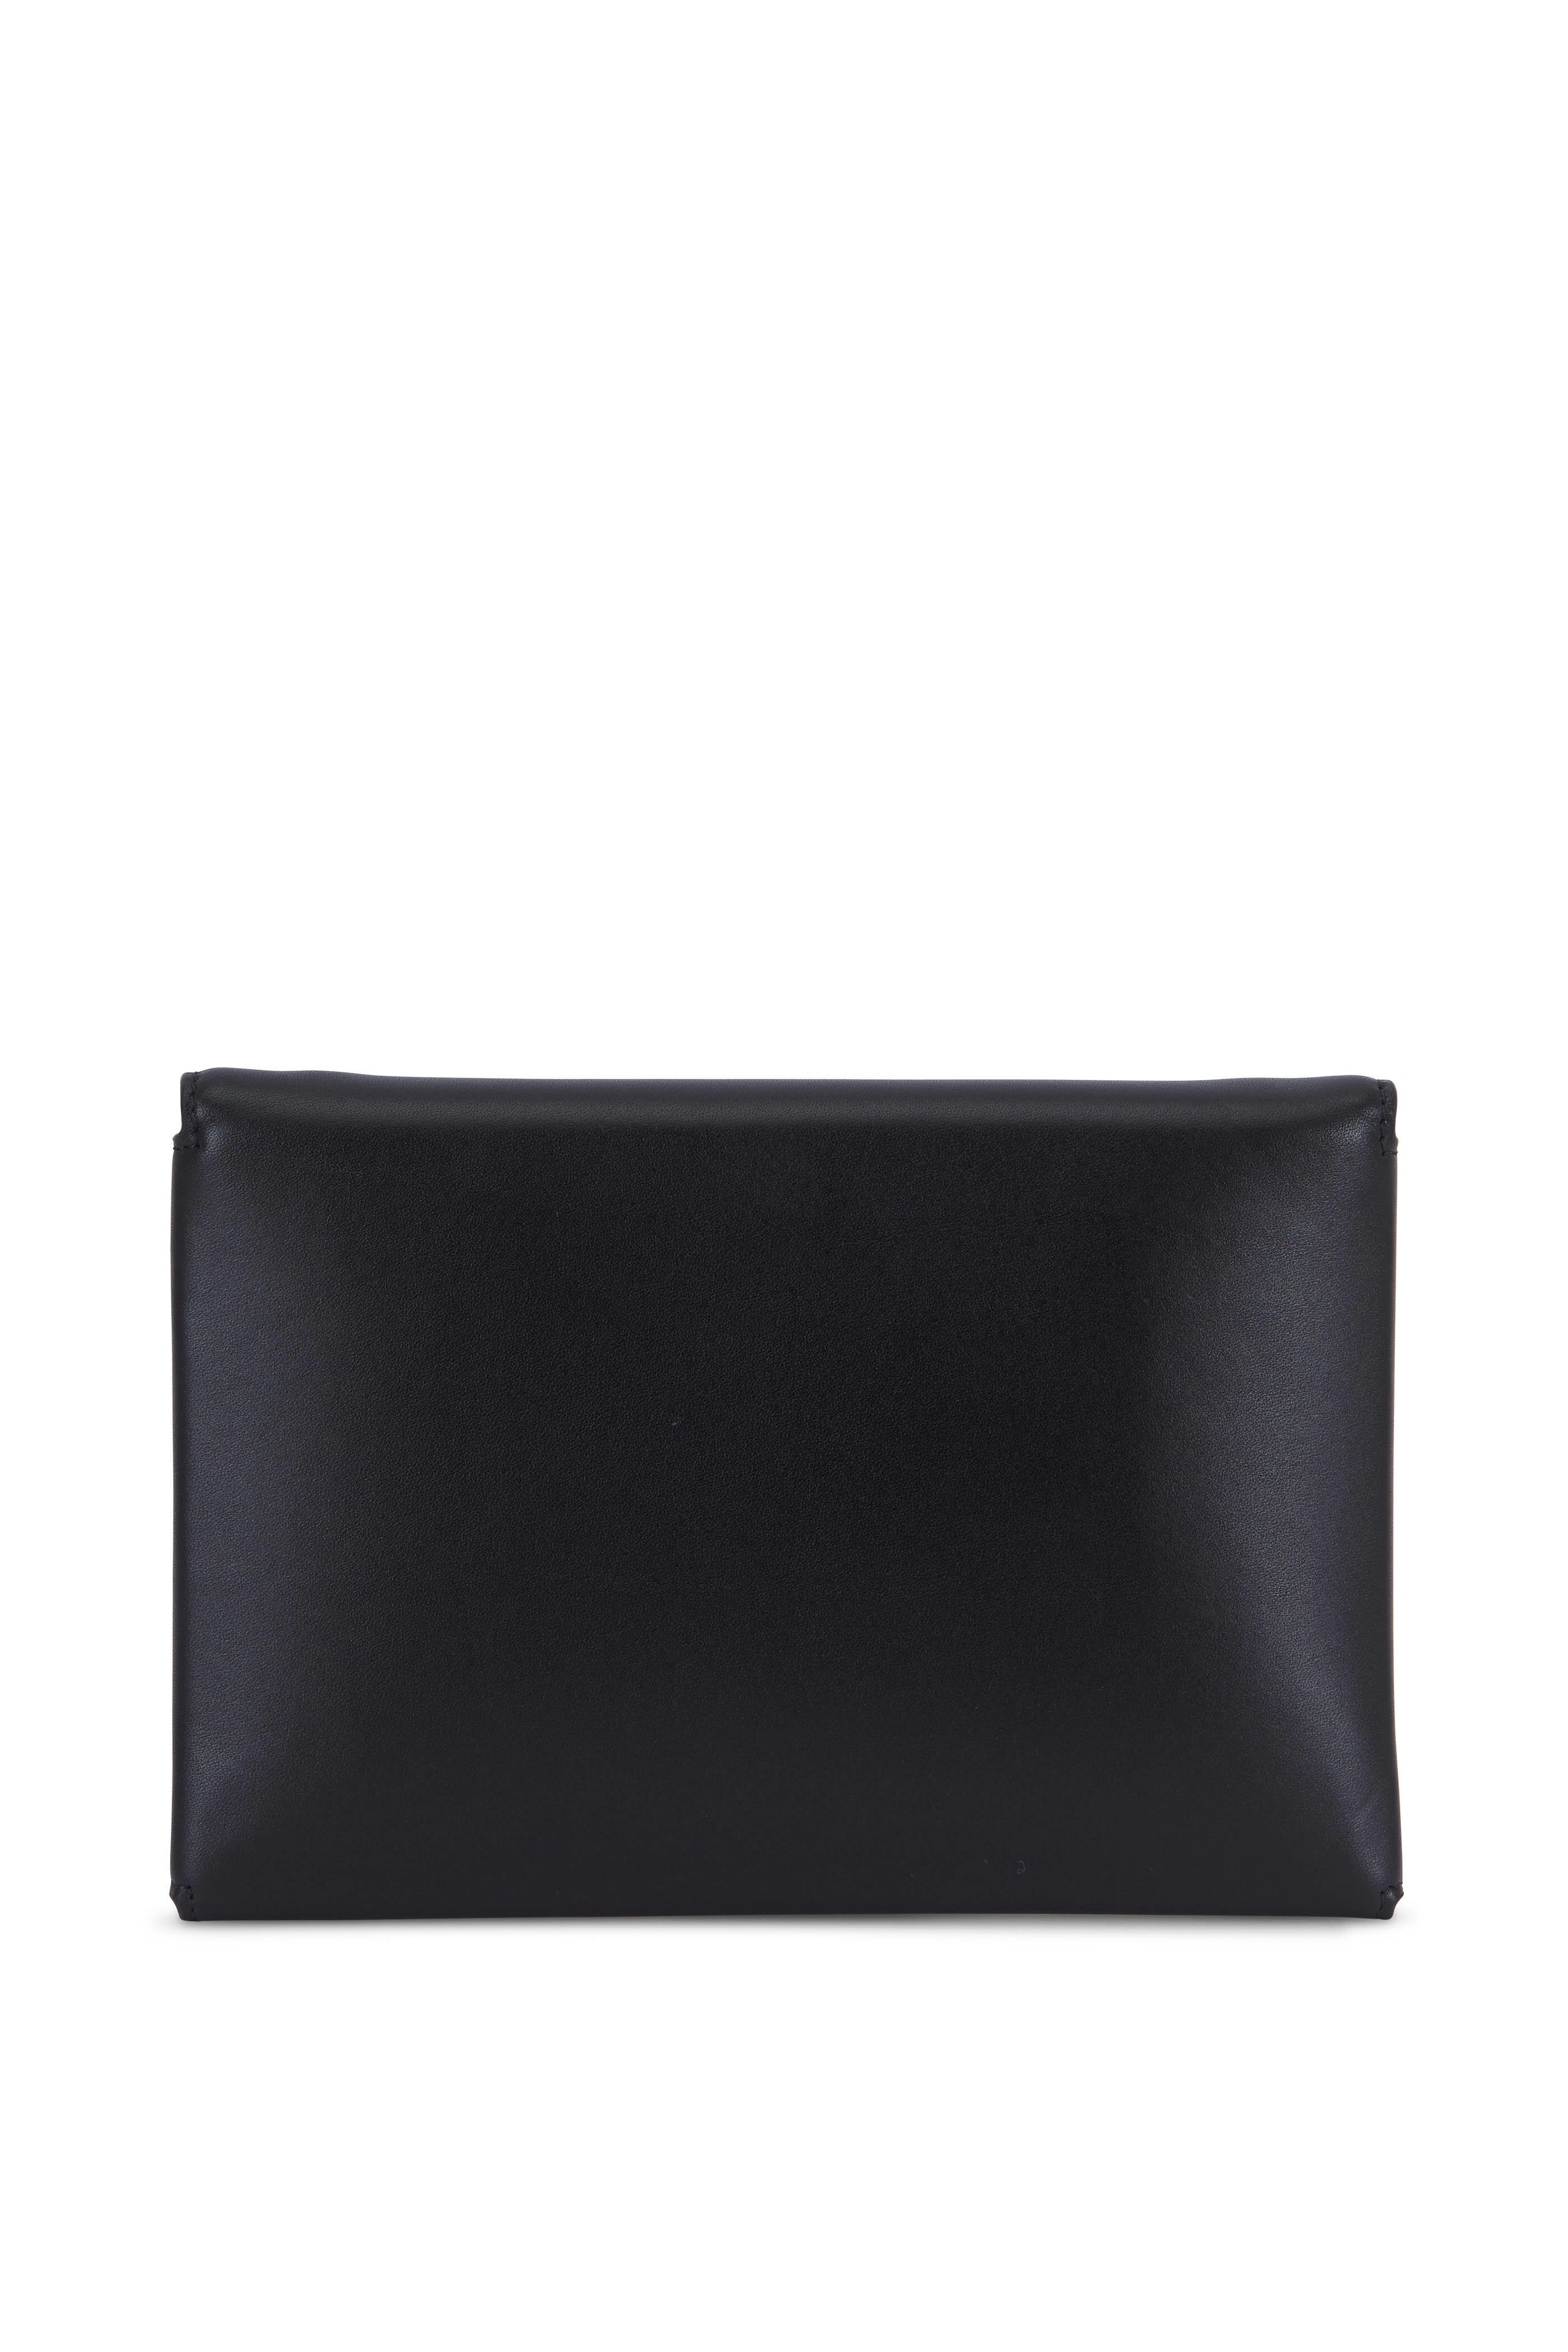 The Row - Black Leather Mini Envelope Clutch | Mitchell Stores